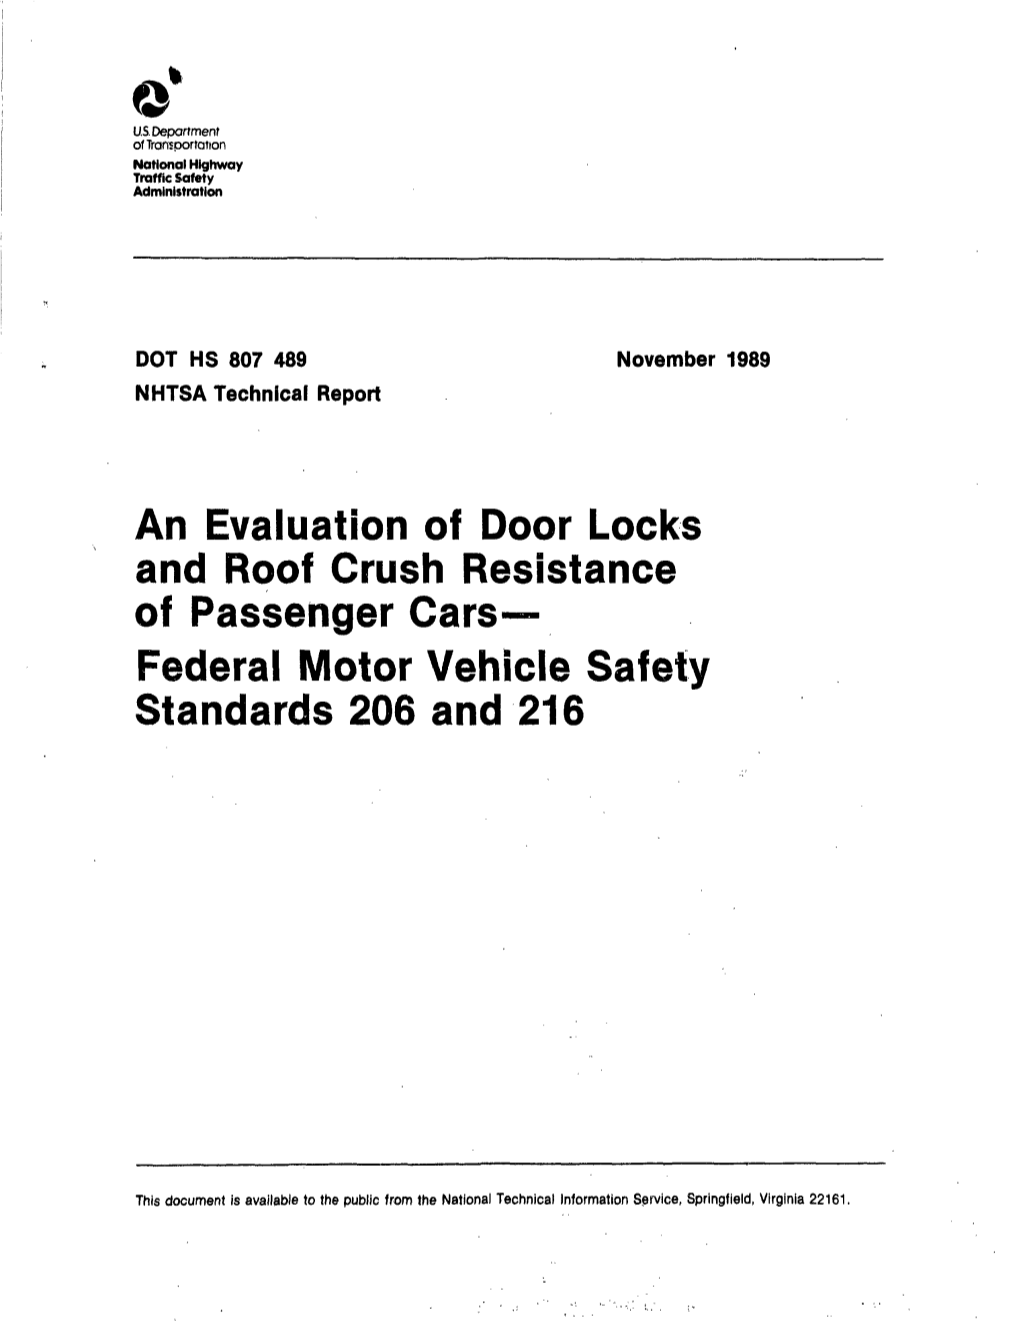 An Evaluation of Door Locks and Roof Crush Resistance of Passenger Cars- Federal Motor Vehicle Safety Standards 206 and 216